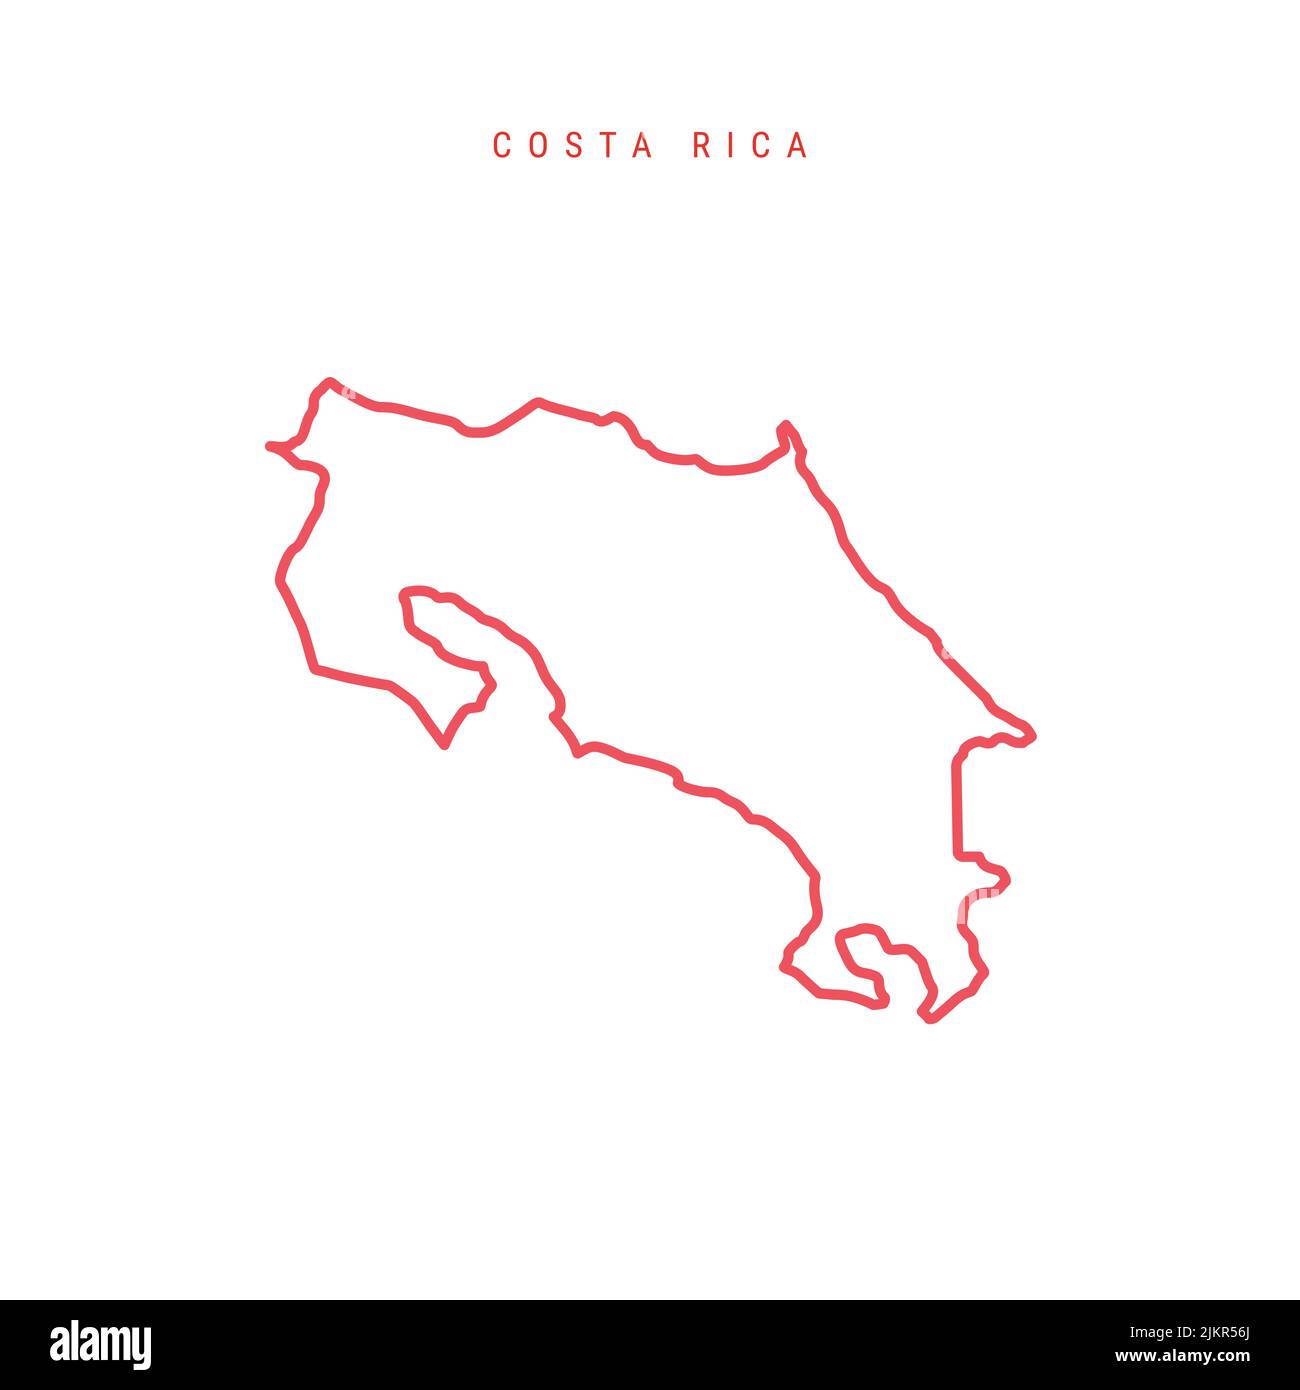 Costa Rica editable outline map. Costa Rican red border. Country name. Adjust line weight. Change to any color. Vector illustration. Stock Vector